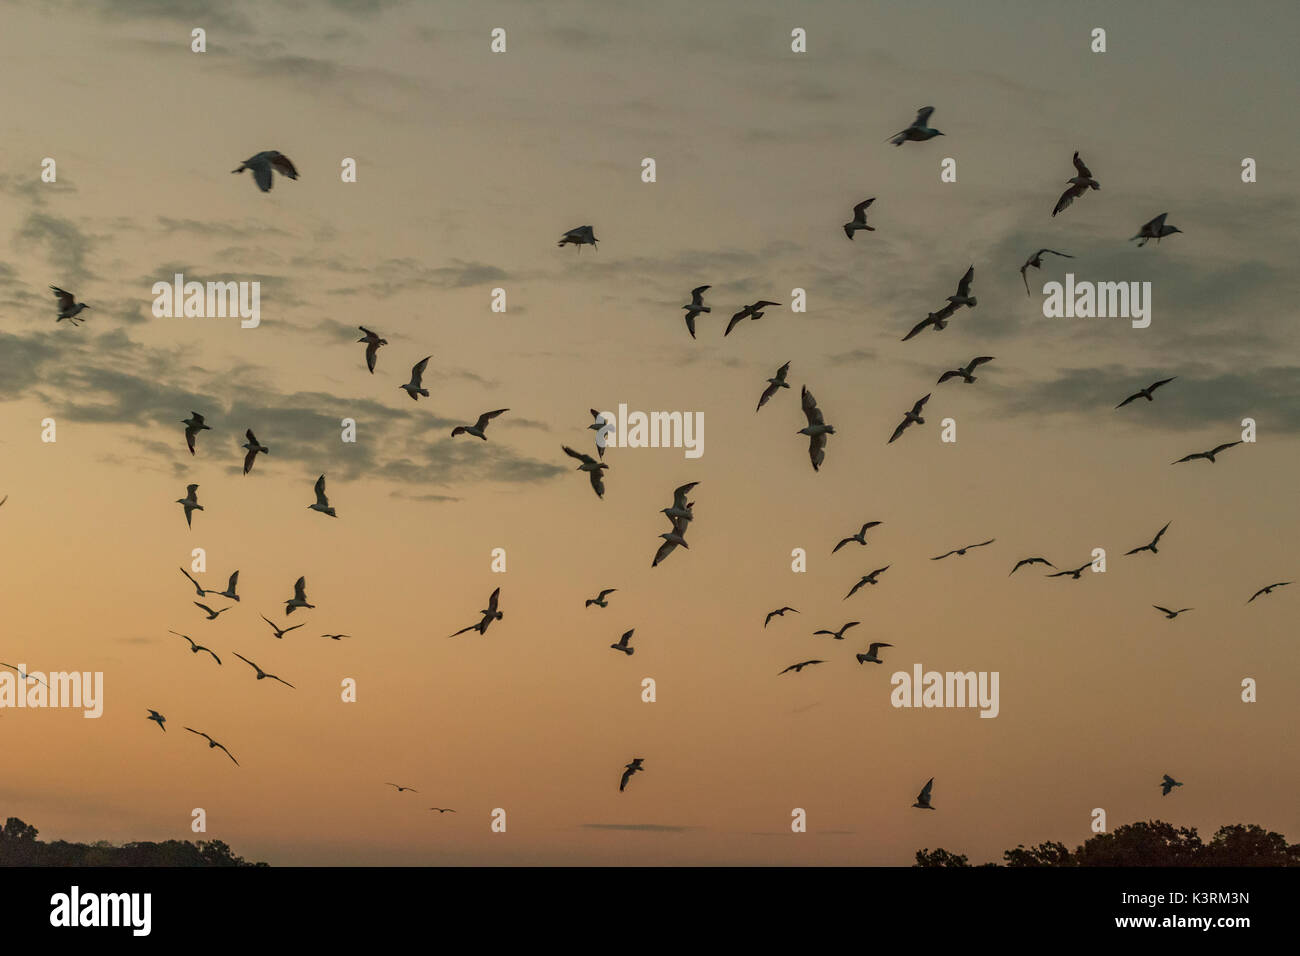 a group of seagulls flying through the air at sunset. Stock Photo